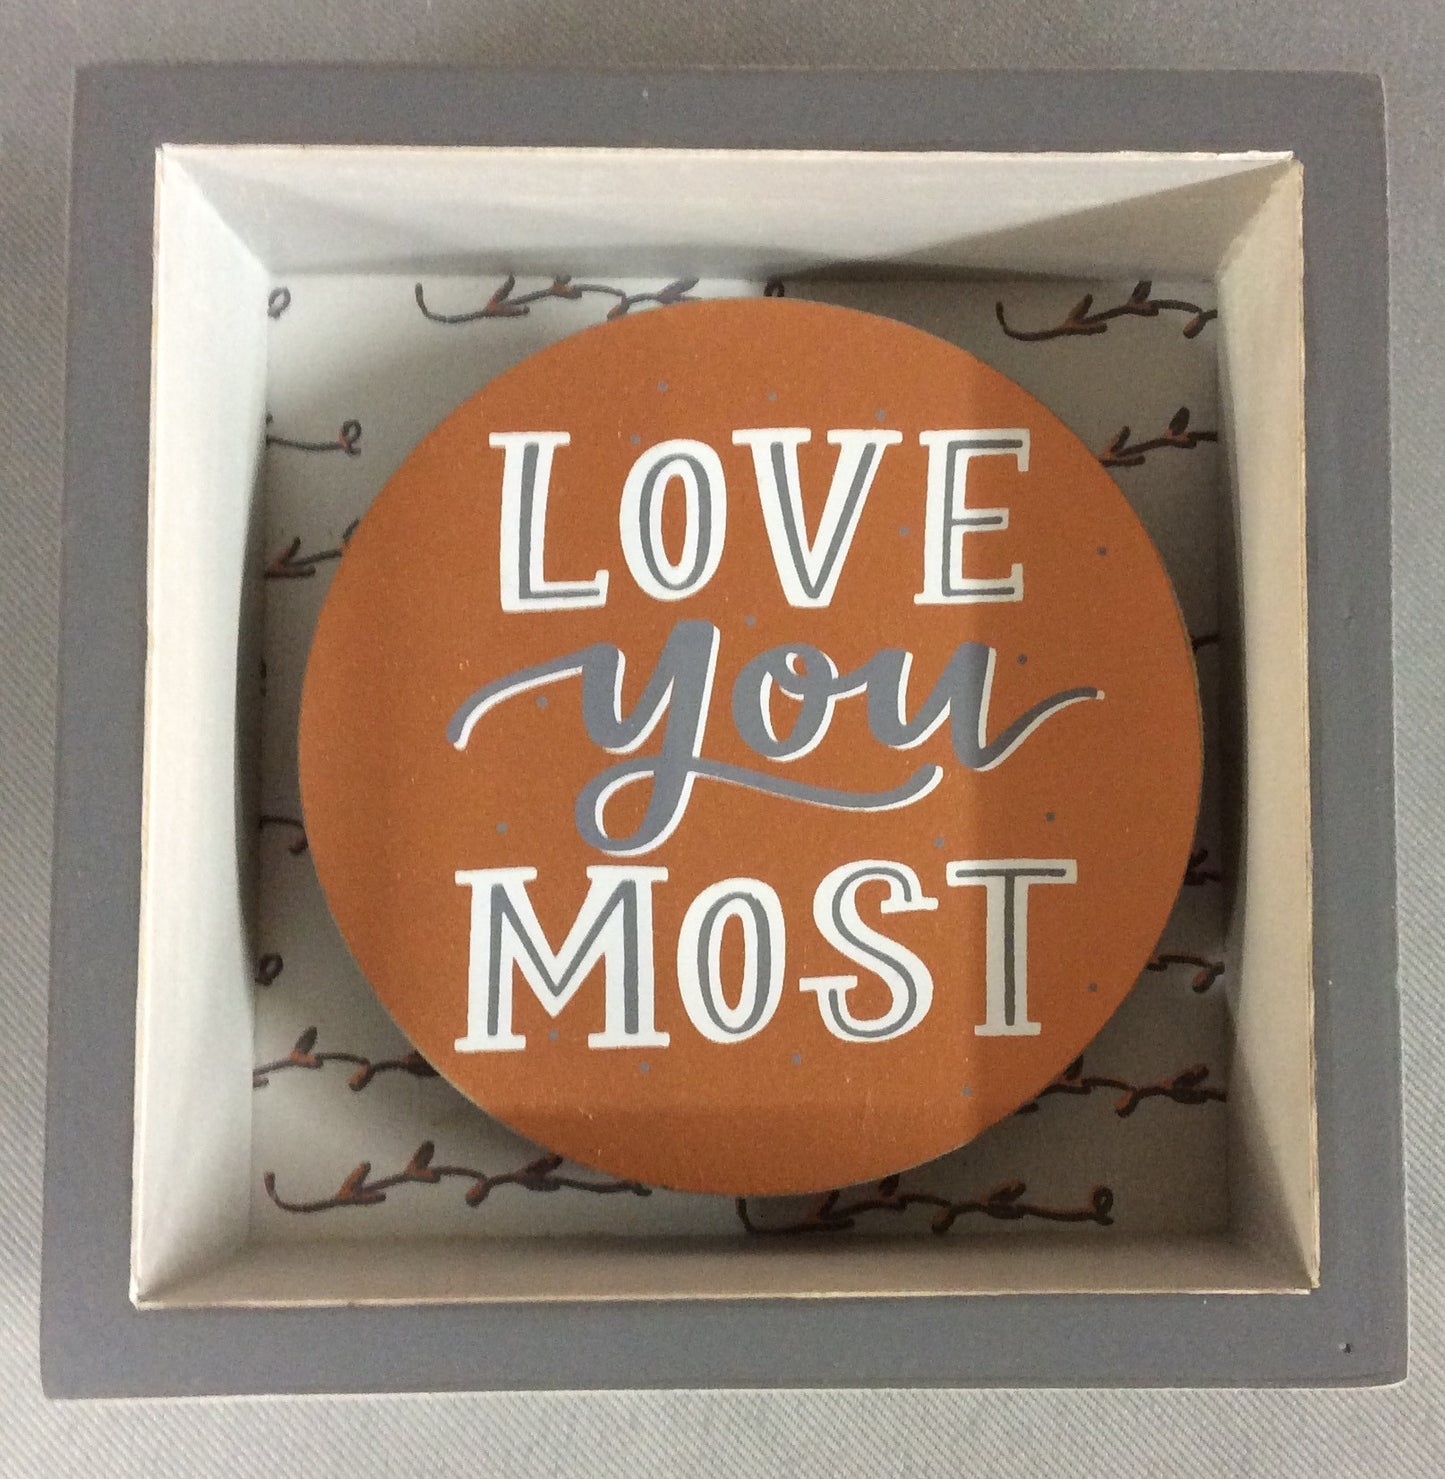 "LOVE YOU MOST" BOX SIGN